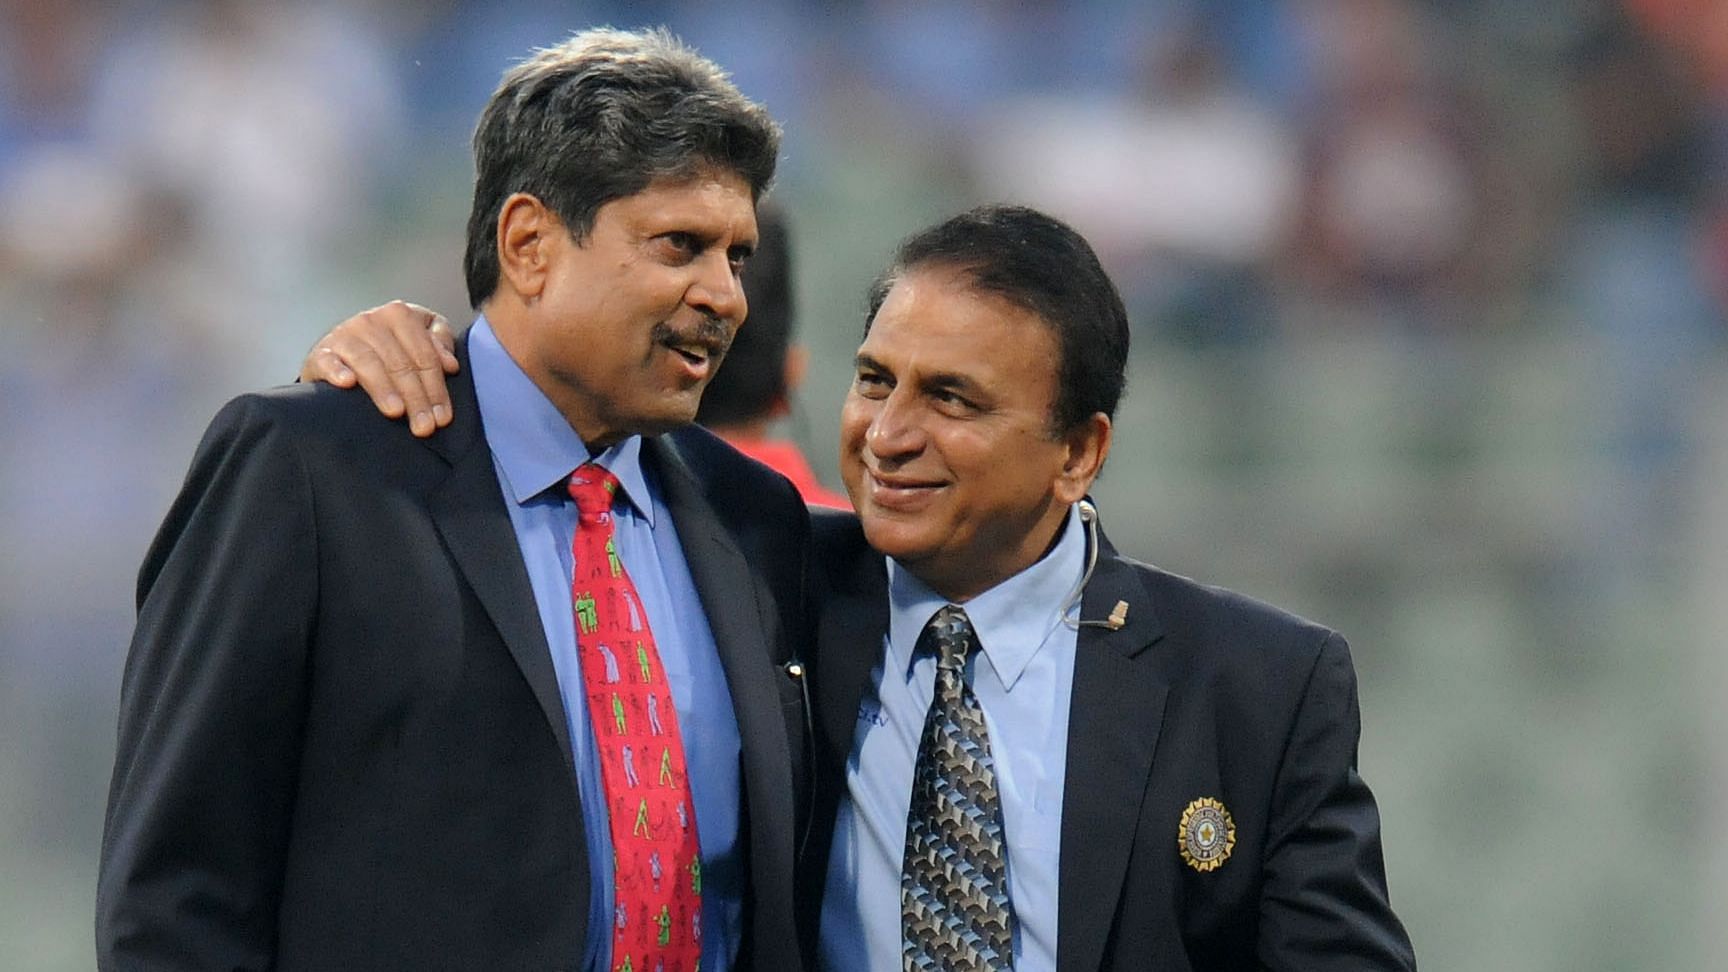 Sunil Gavaskar has heaped praise on former teammate Kapil Dev and spoke about their time together with the Indian cricket team.